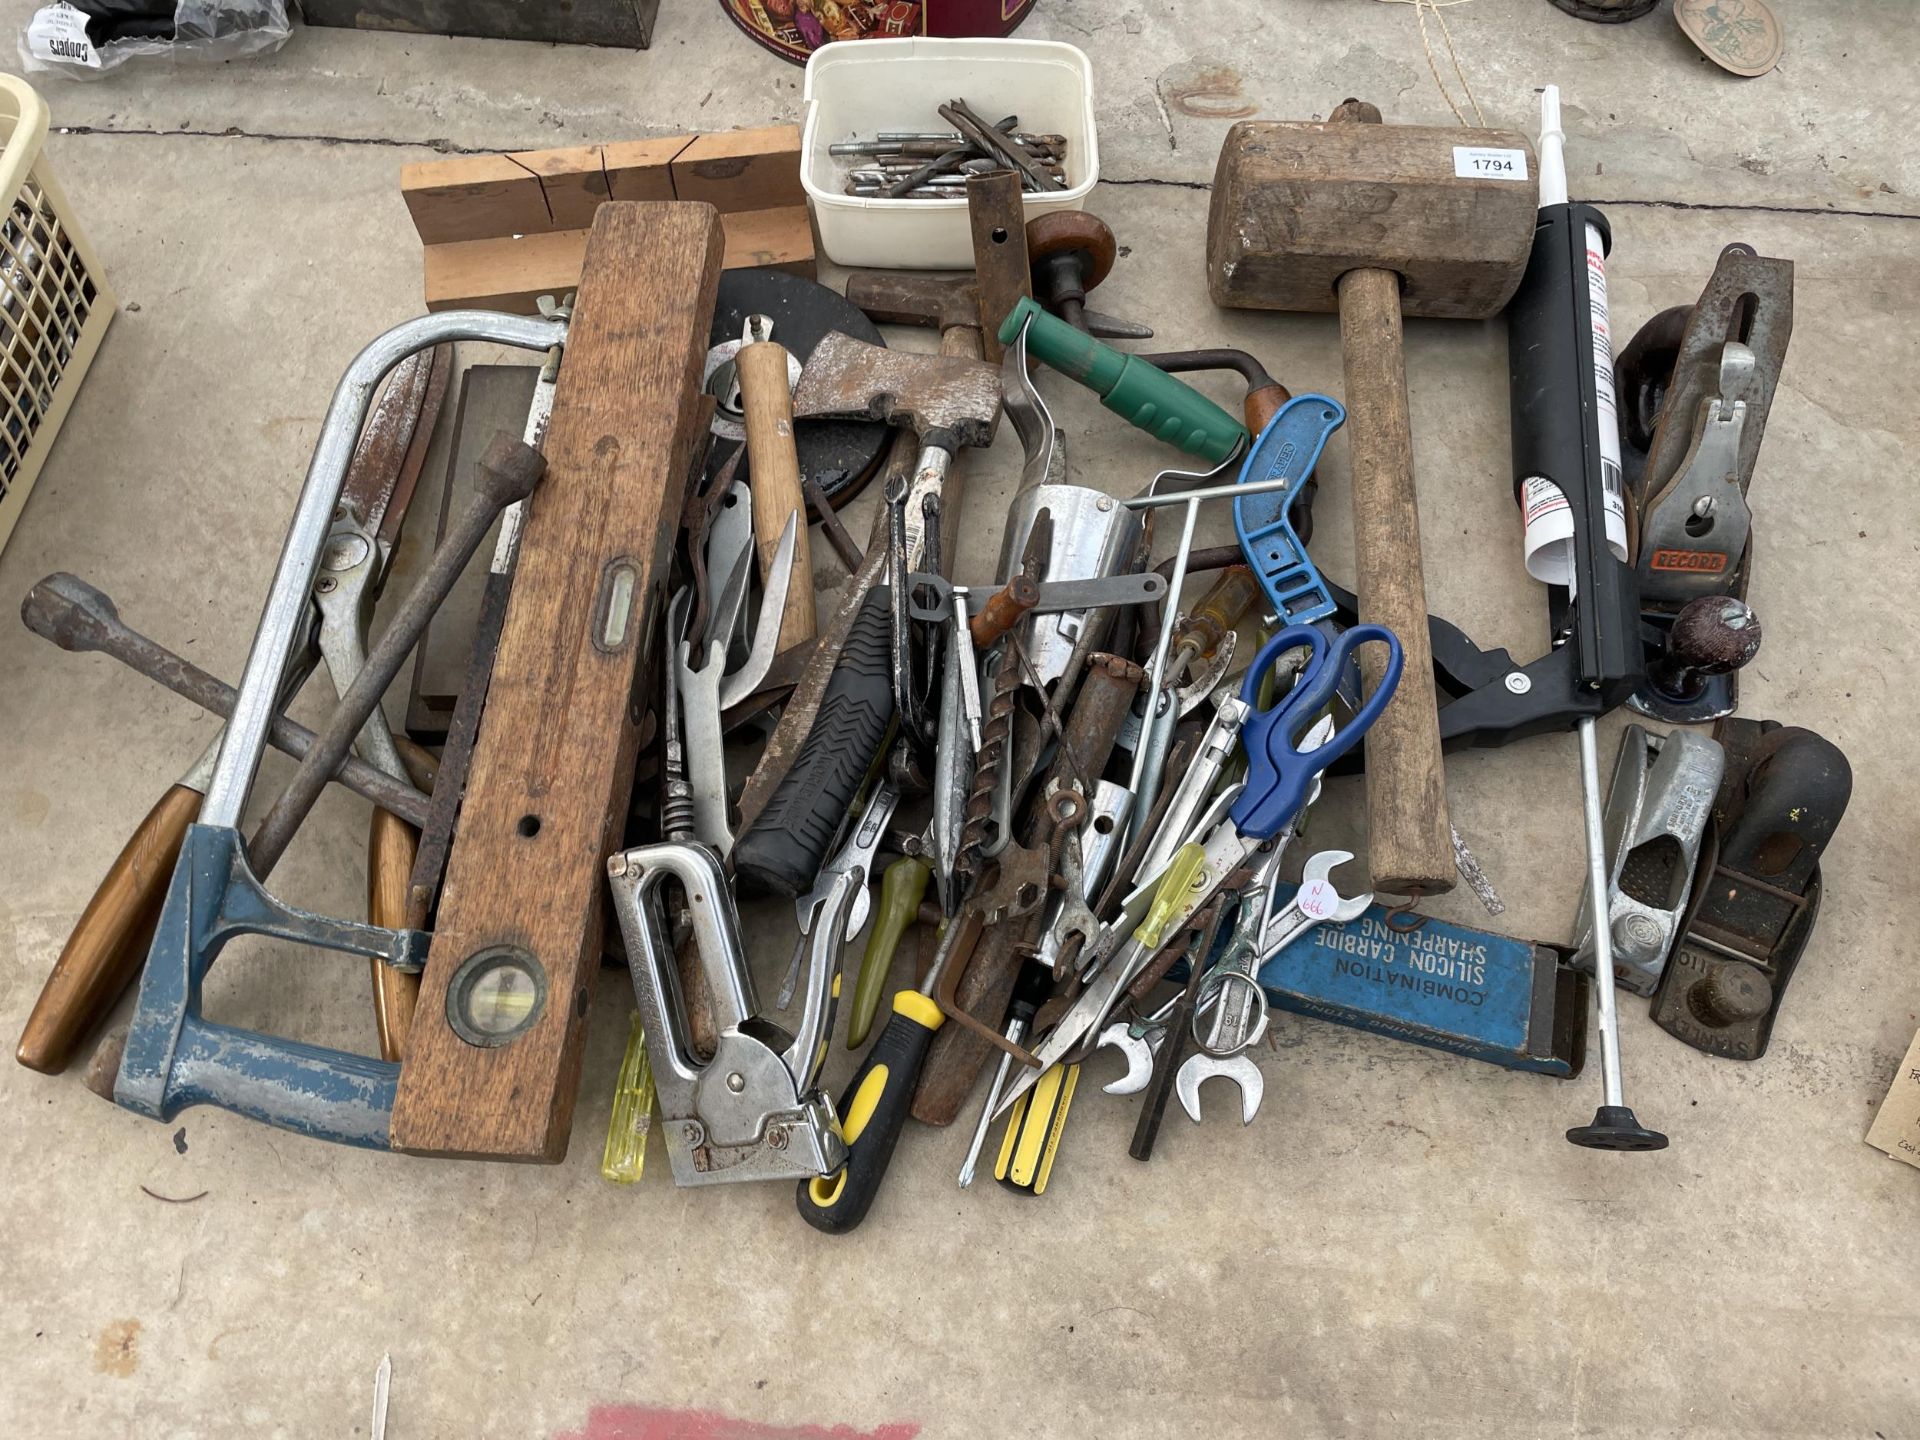 A LARGE ASSORTMENT OF HAND TOOLS TO INCLUDE SPANNERS, AN AXE AND WOOD PLANES ETC